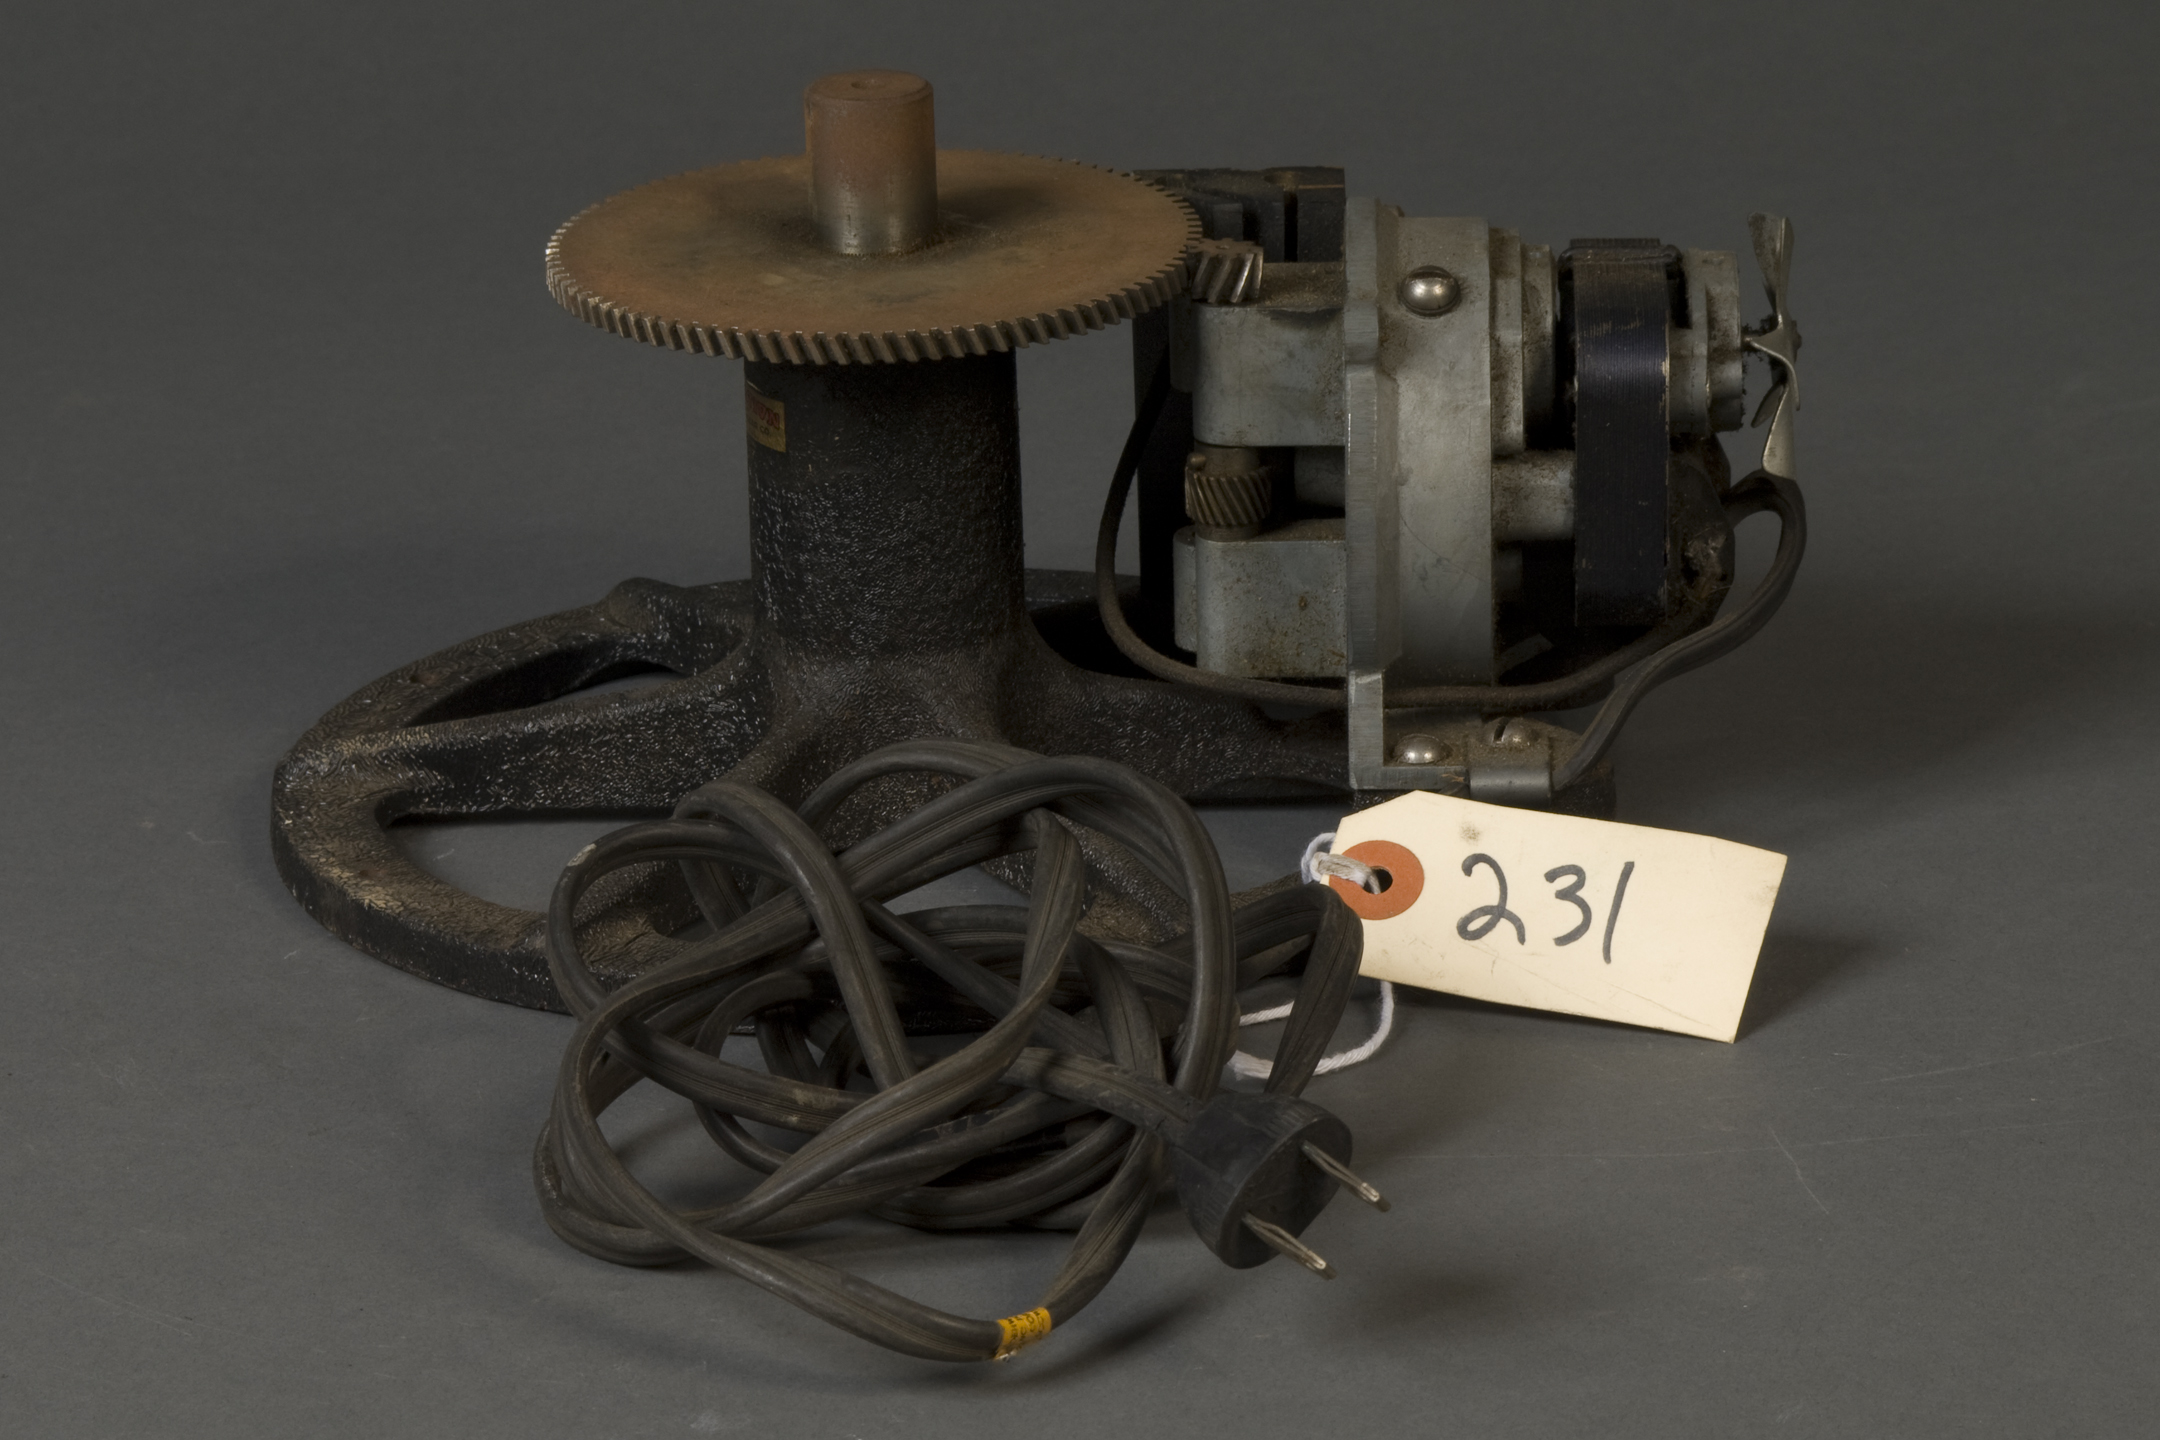 geared mechanism with an electric plug. Attached to the plug's wire is a tag that reads "231." The device is geared to another smaller gear on a device with what looks like a flywheel coming from the front of it. 